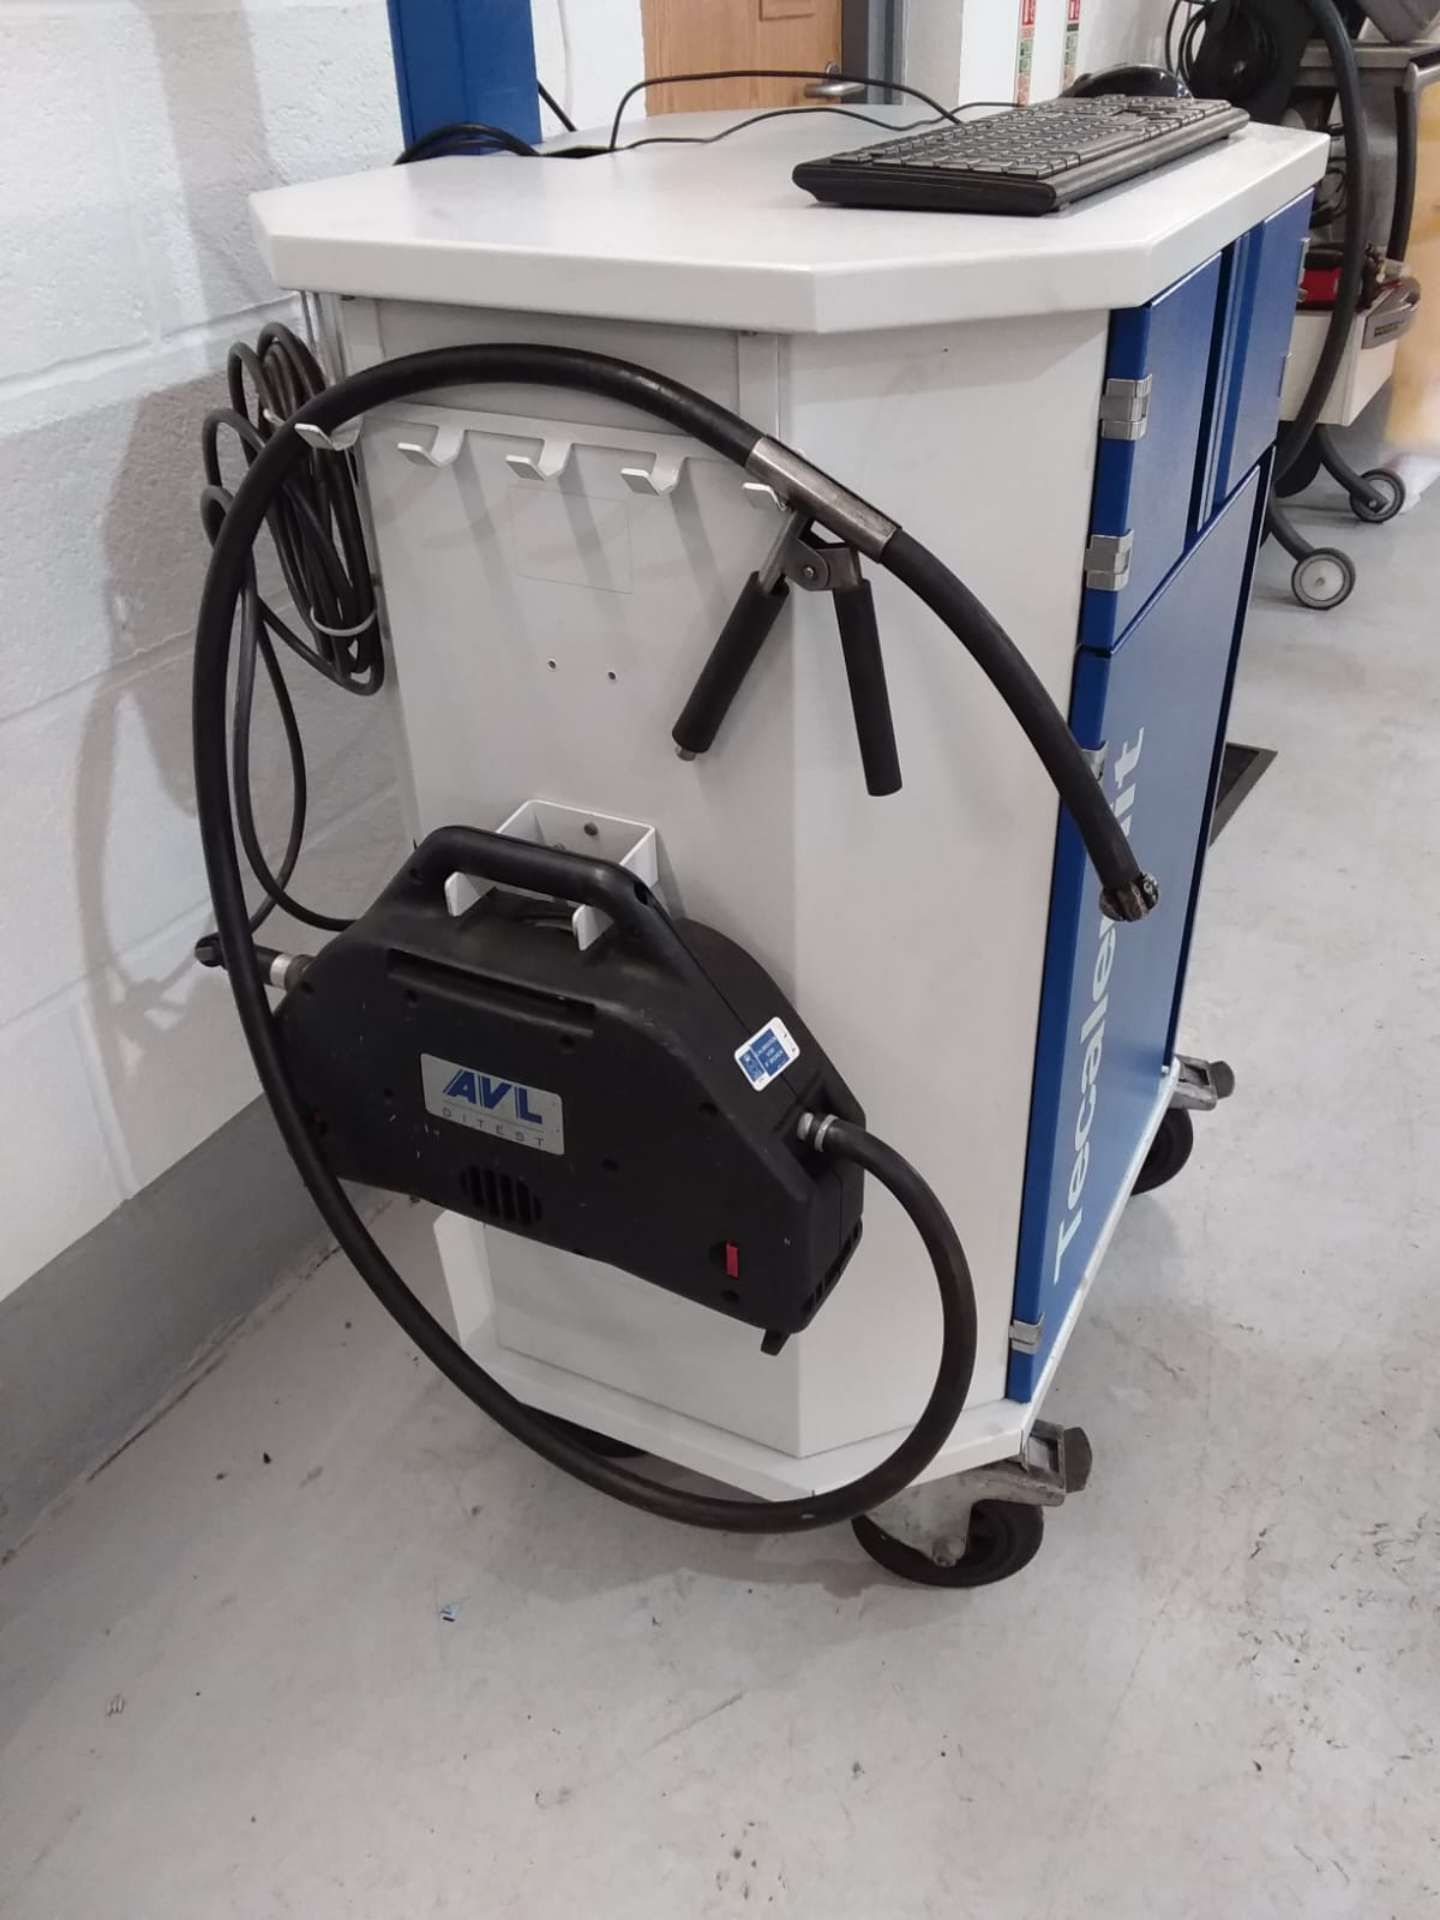 Tecalemit Rolling Road Brake Tester and AVL d-Link gas emission analyser with display read out - Image 3 of 10